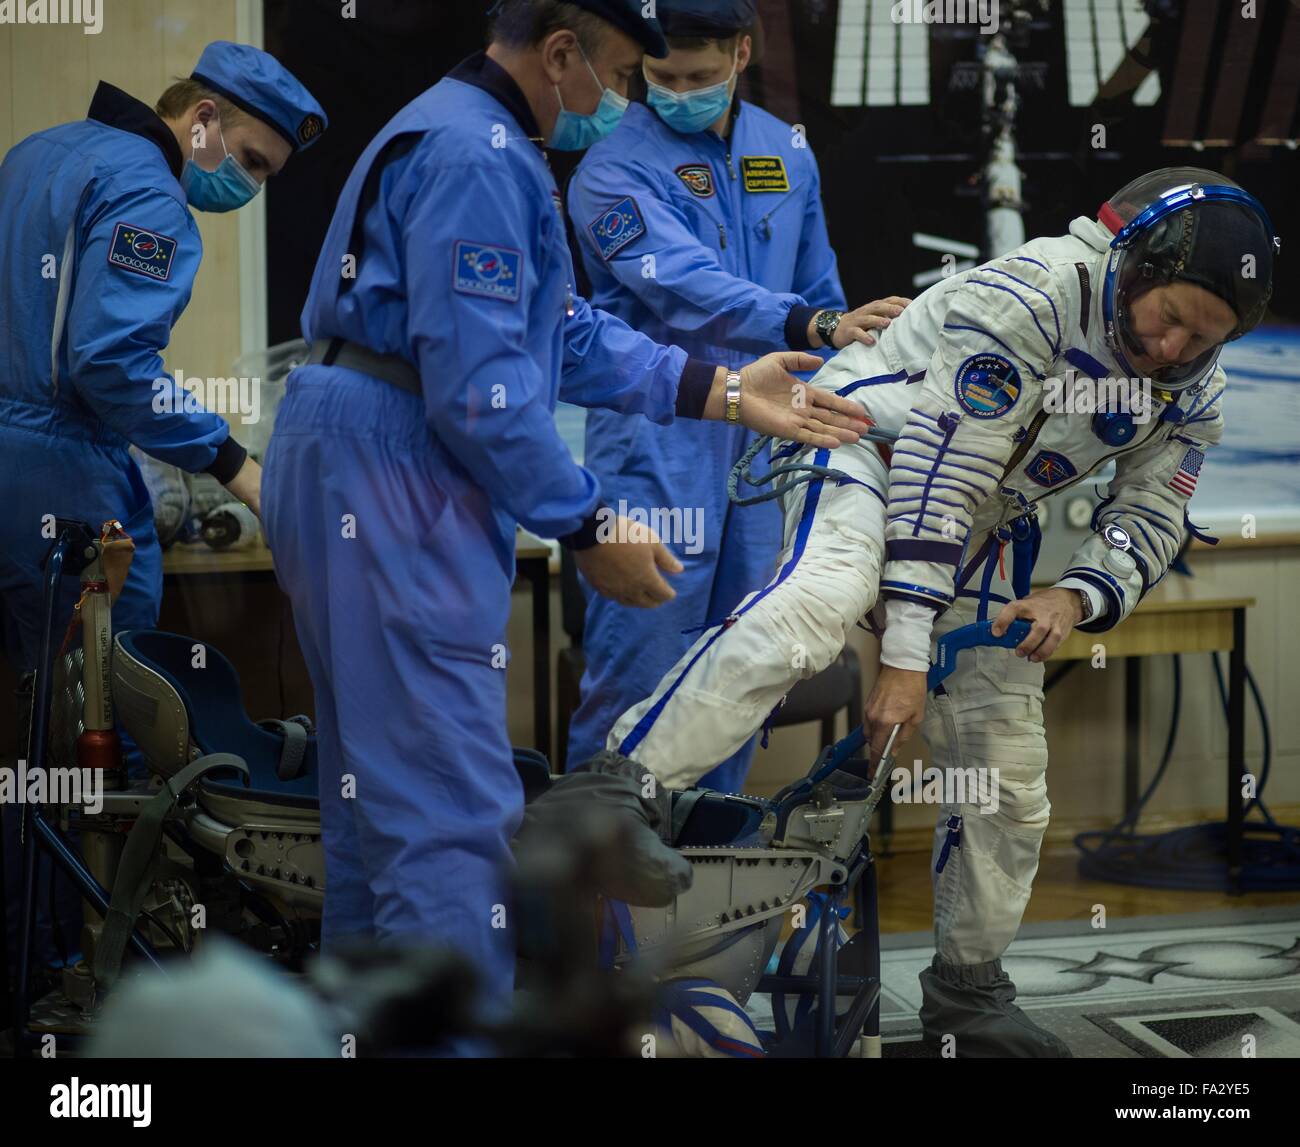 International Space Station Expedition 46 crew member American astronaut Tim Kopra has his Sokol space suits adjusted in Building 254 before launch onboard the Soyuz TMA-19M spacecraft December 15, 2015 in Baikonur, Kazakhstan. Stock Photo